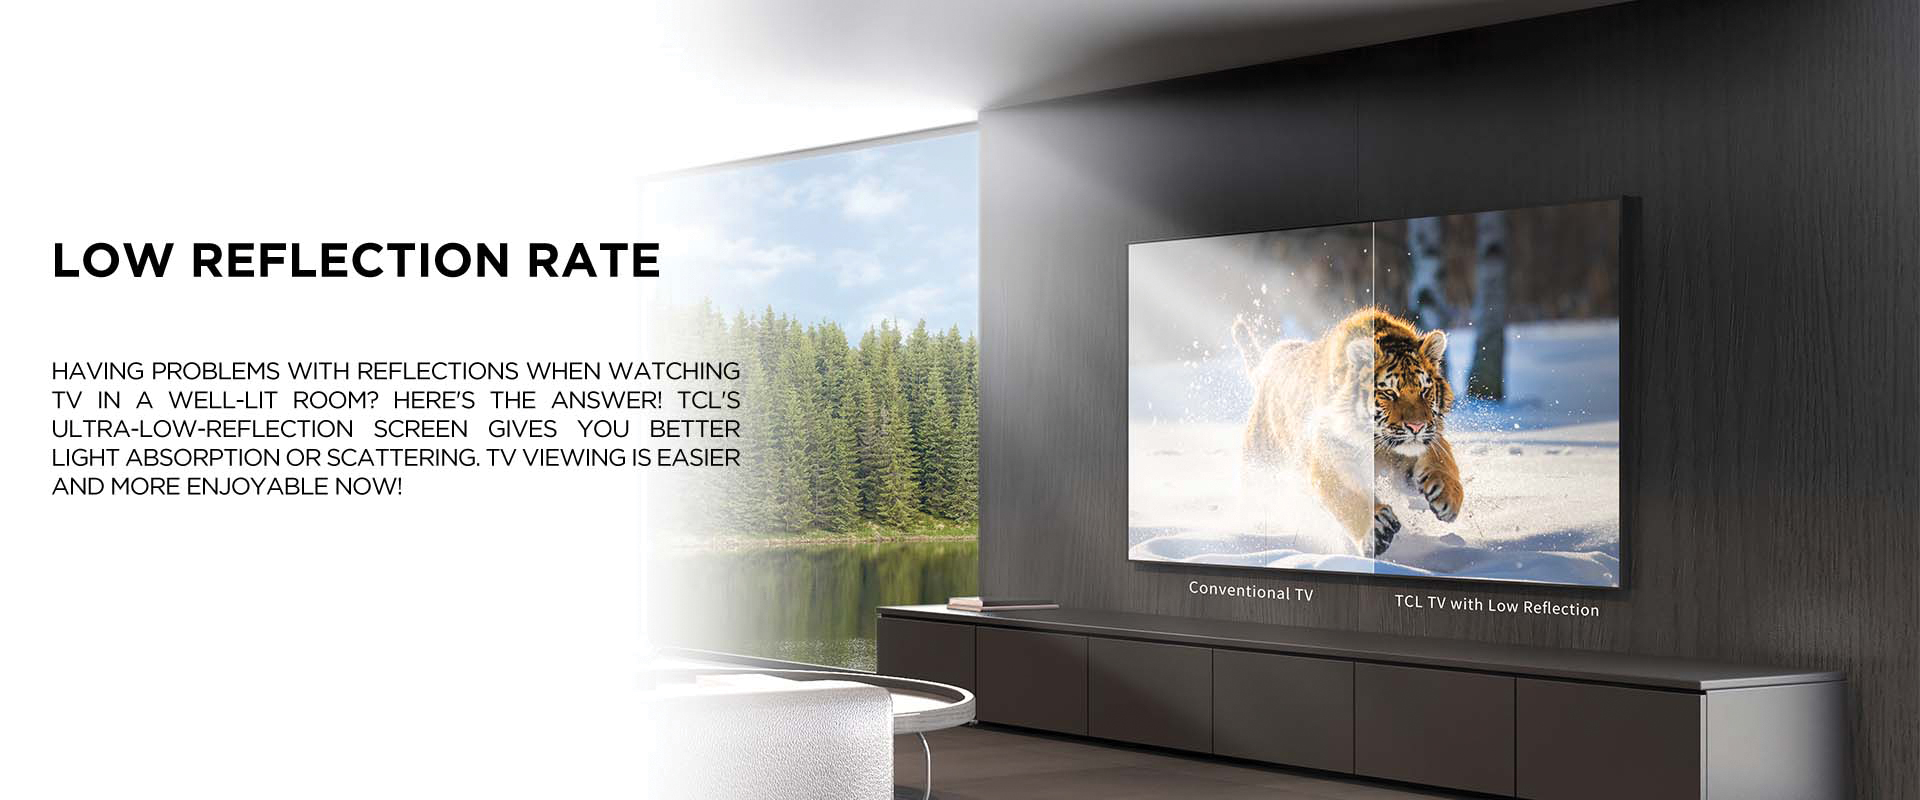 low reflection rate - Having problems with reflections when watching TV in a well-lit room? Here's the answer! TCL's ultra-low-reflection screen gives you better light absorption or scattering. TV viewing is easier and more enjoyable now!